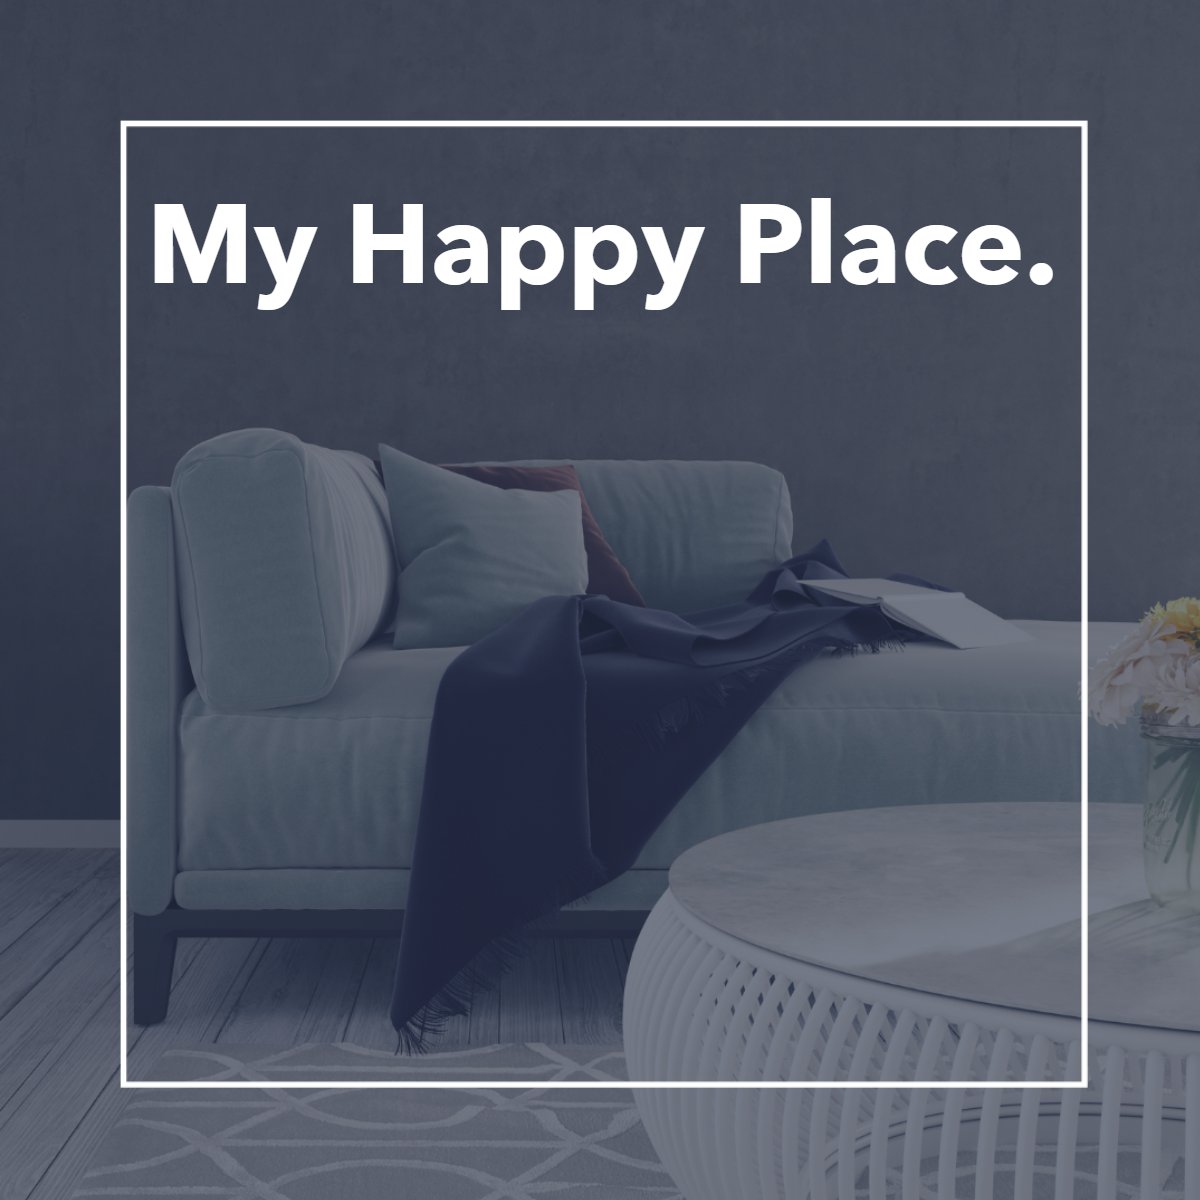 Home is my happy place. 🤗

#home #happyplace #homesweethome #homesofinstagram
 #LPTRealty #lptfam #lpttexas #htownrealestate #ctxrealestate #ctxguy #guycourtney